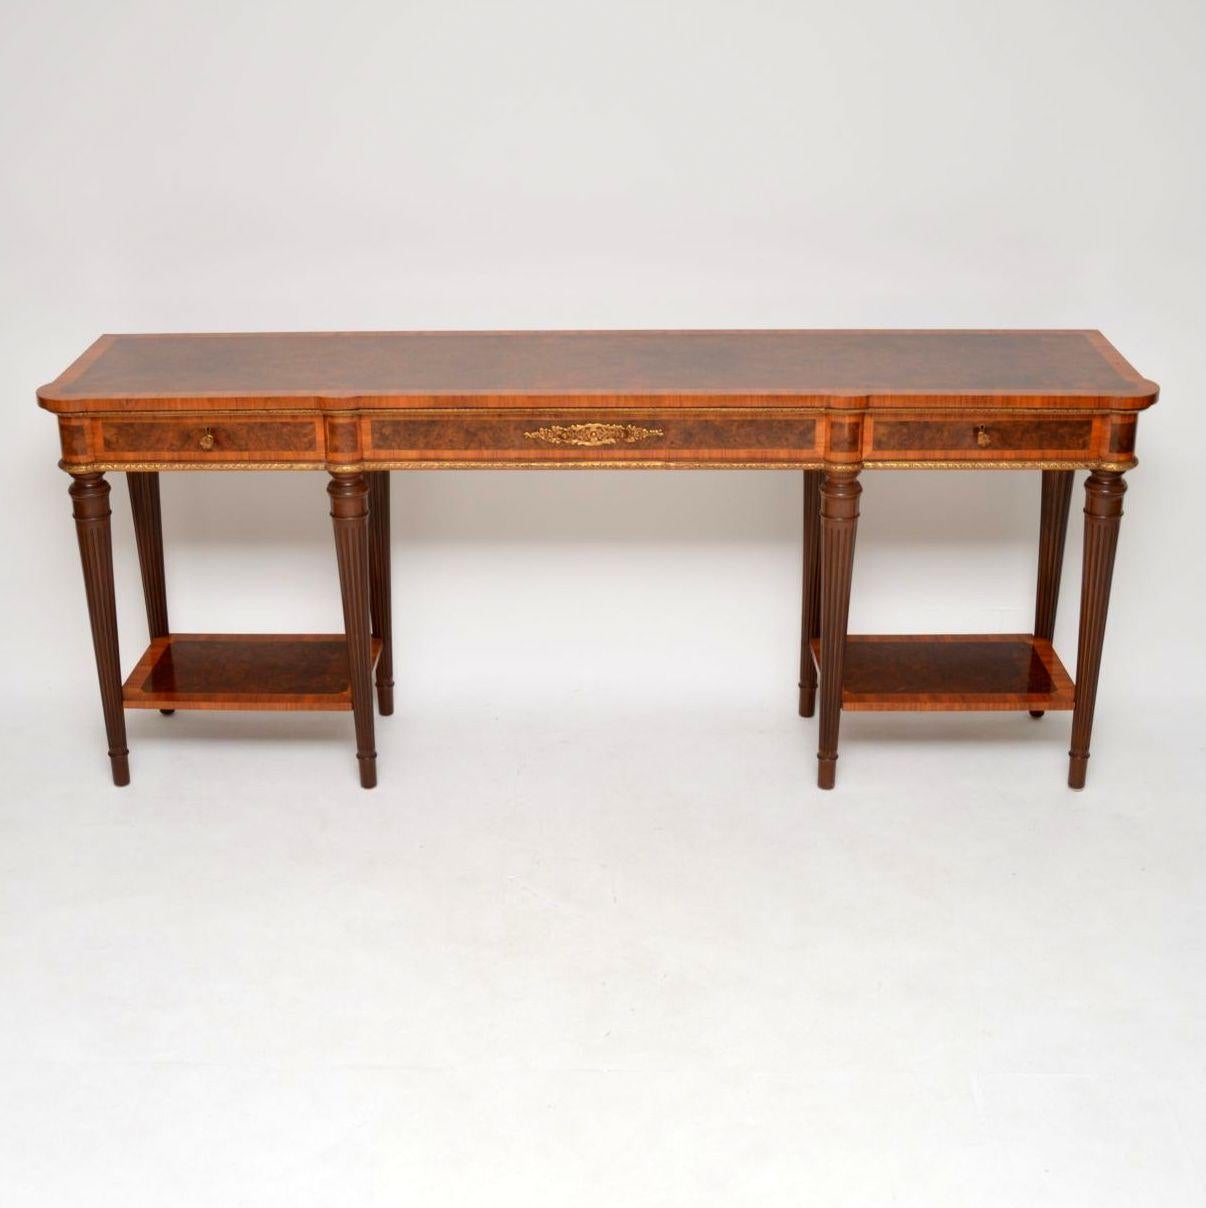 Very large impressive antique French style burr walnut and Kingwood console table of exceptional quality. It’s just been French polished, so is in excellent condition and I would date it to around the 1930s period. This table is such good quality